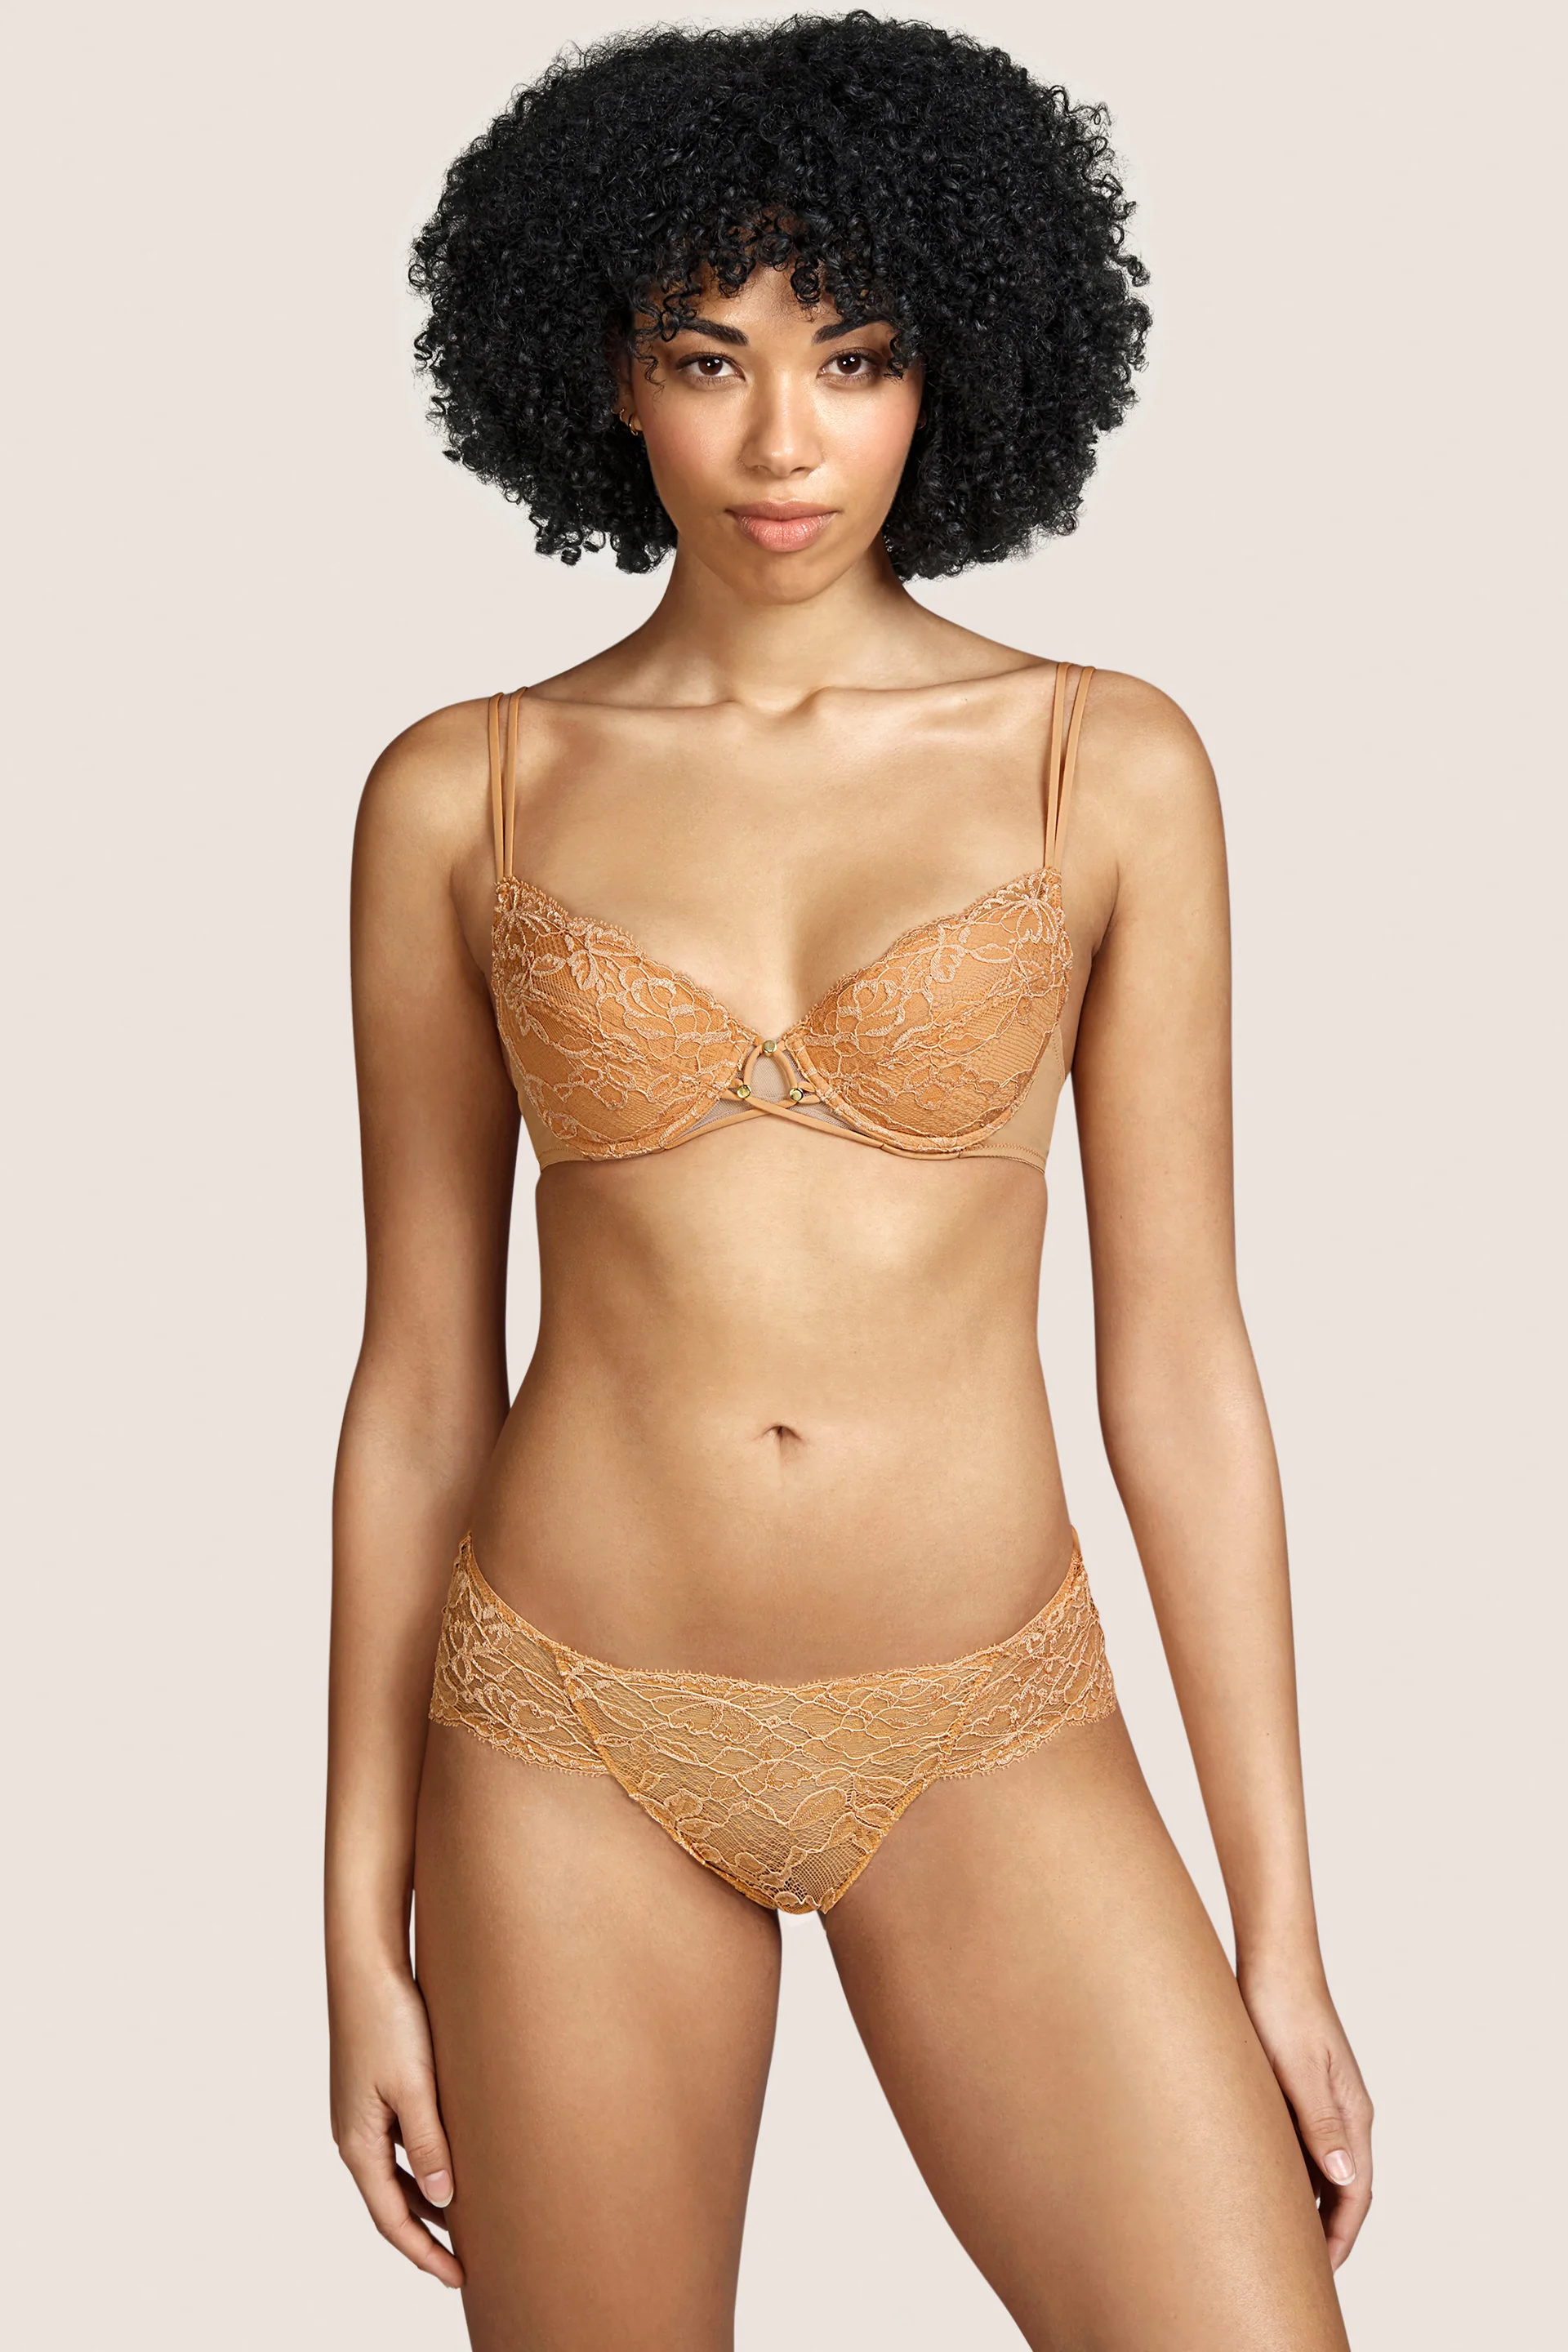 Andres Sarda TYNG evening blue push-up bra removable pads